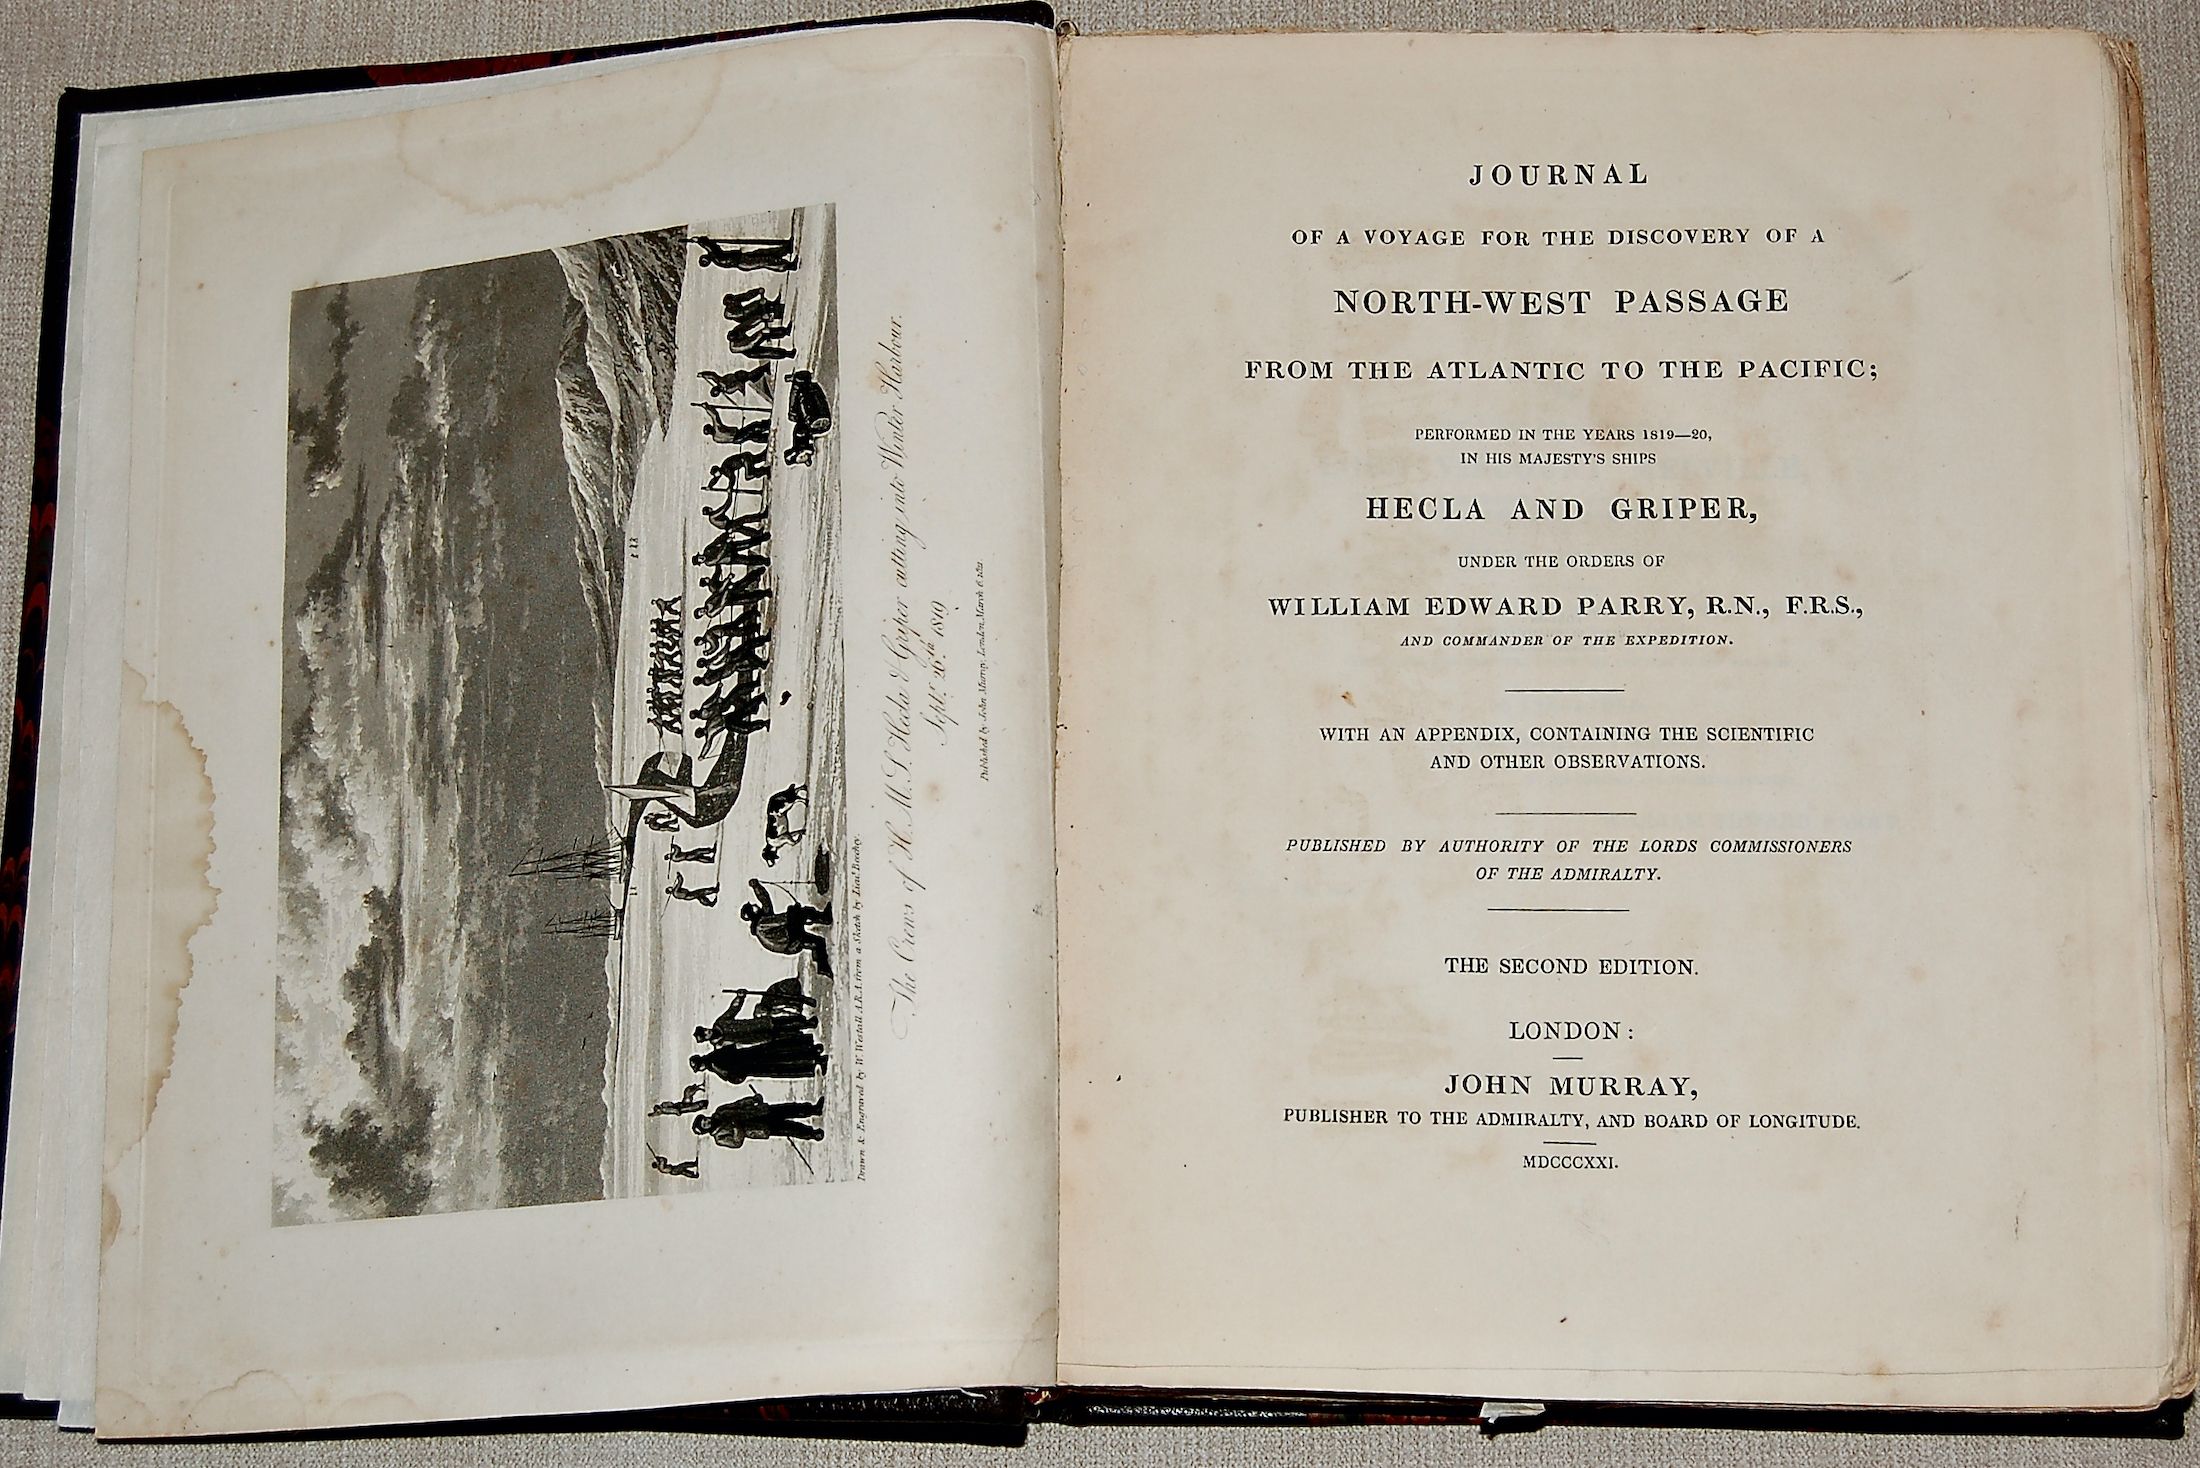  Journal of a Voyage for the Discovery of a North-West Passage from the Atlantic to the Pacific; Performed in the Years 1819- 20, in His Majesty’s Ships Hecla and Griper under the Orders of William Edward Parry, R.N., F.R.S, and Commander of the Expedit